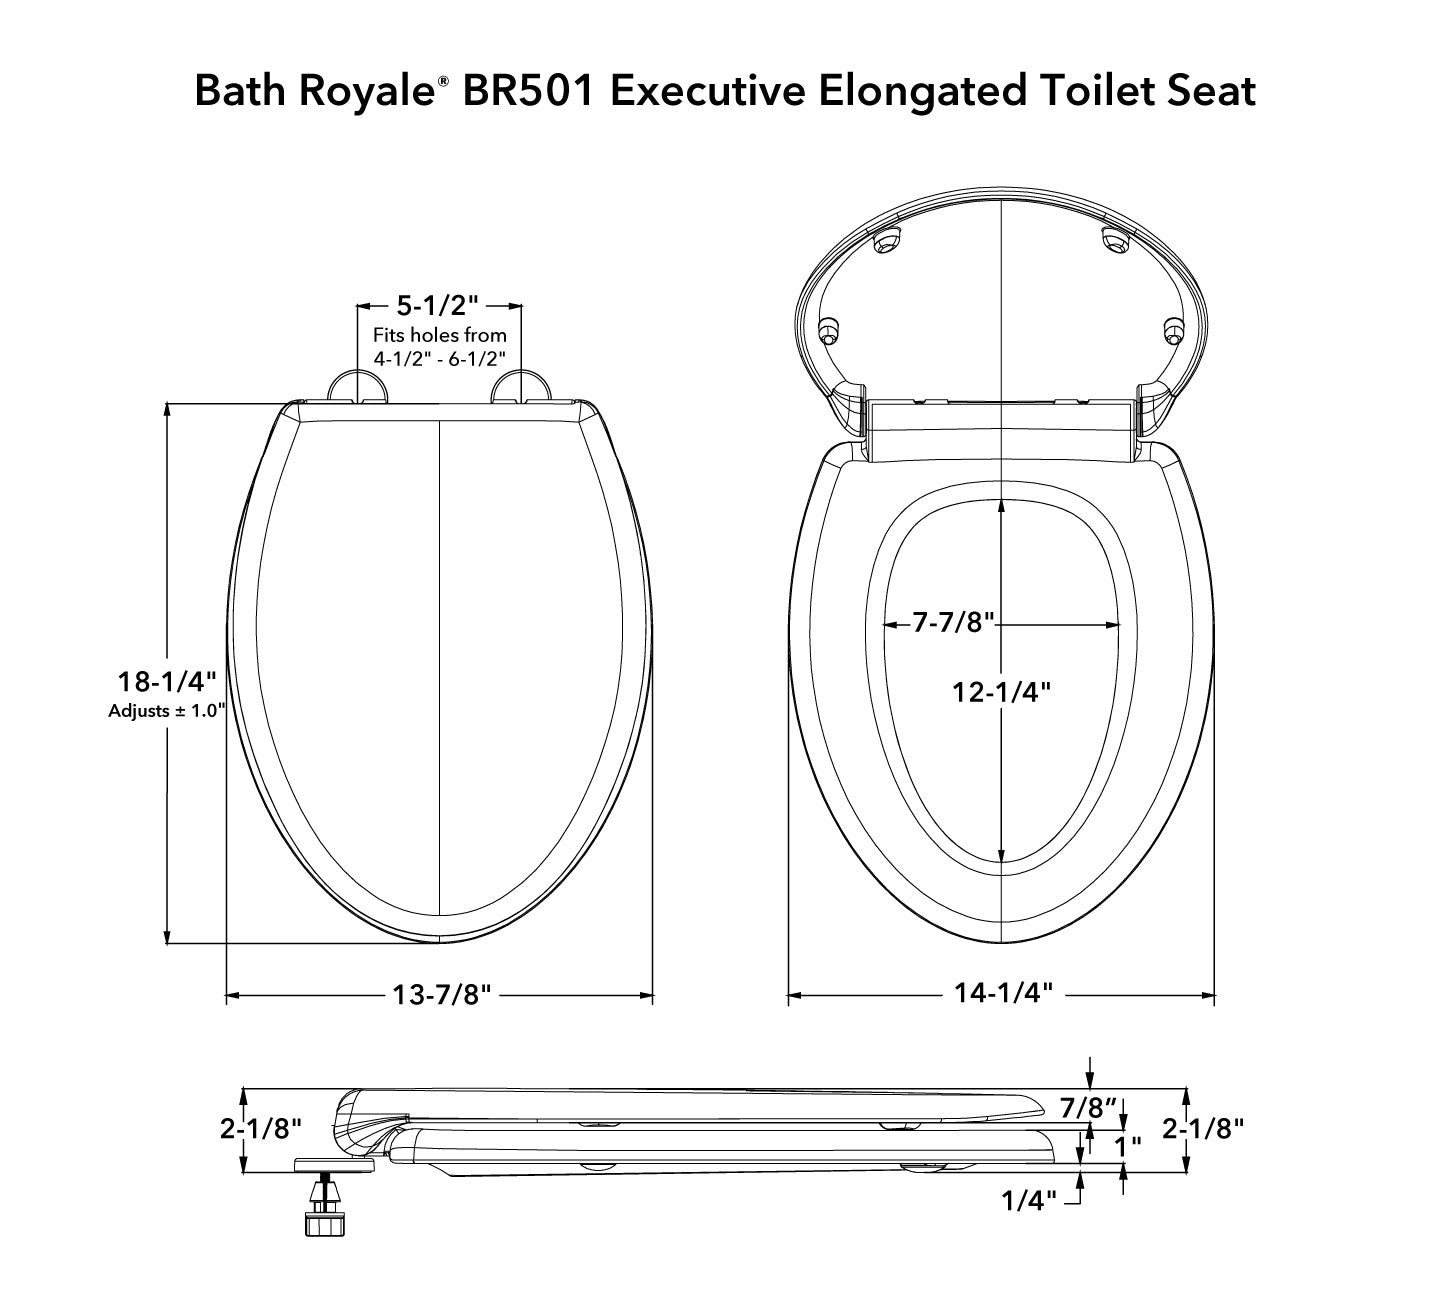 BR500 Executive Elongated Toilet Seat Dimensions